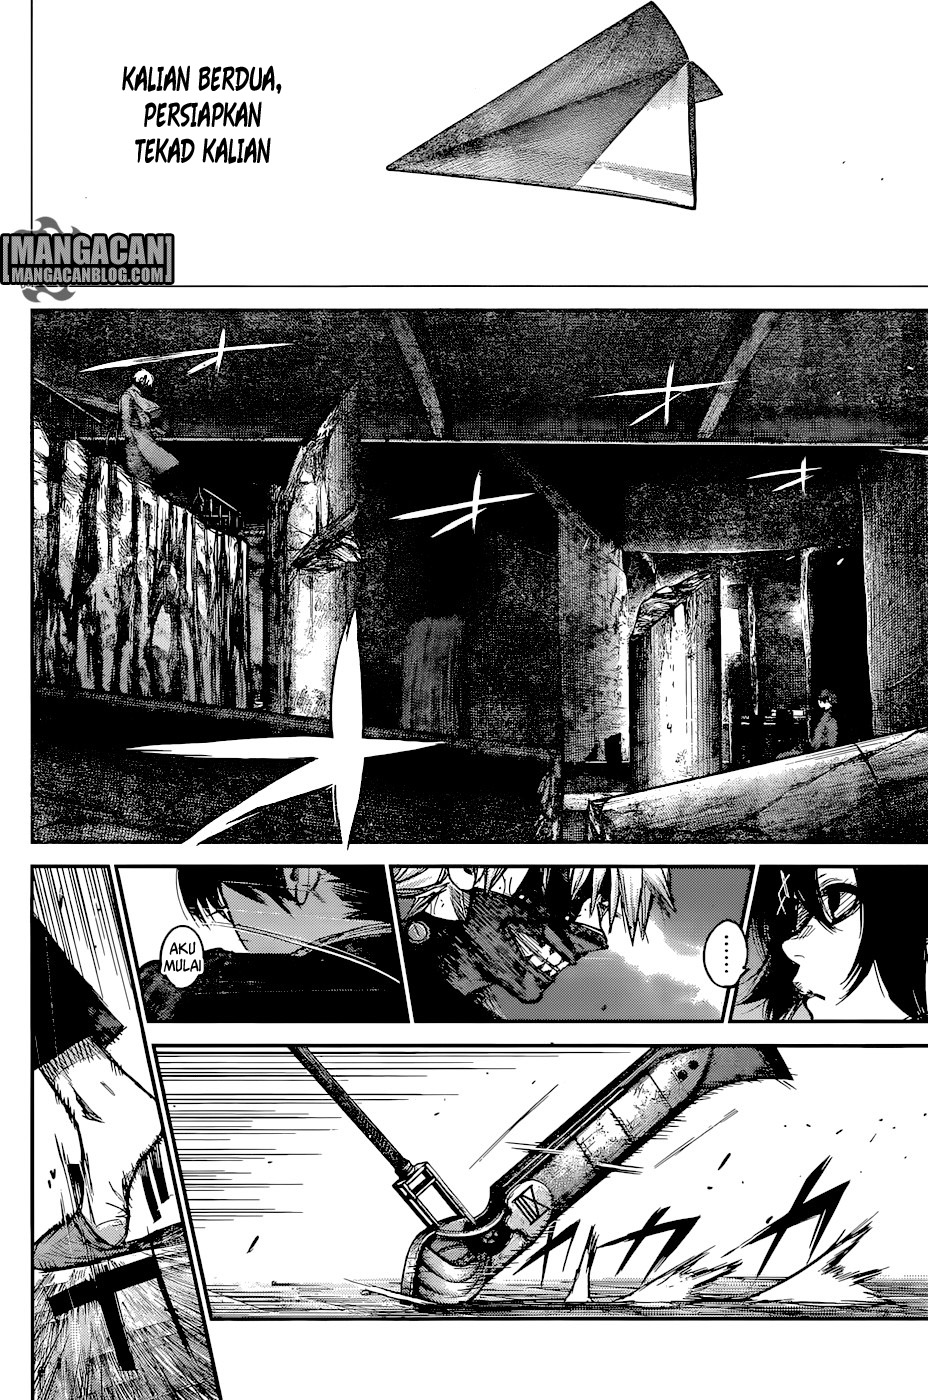 Tokyo Ghoul:re Chapter 143